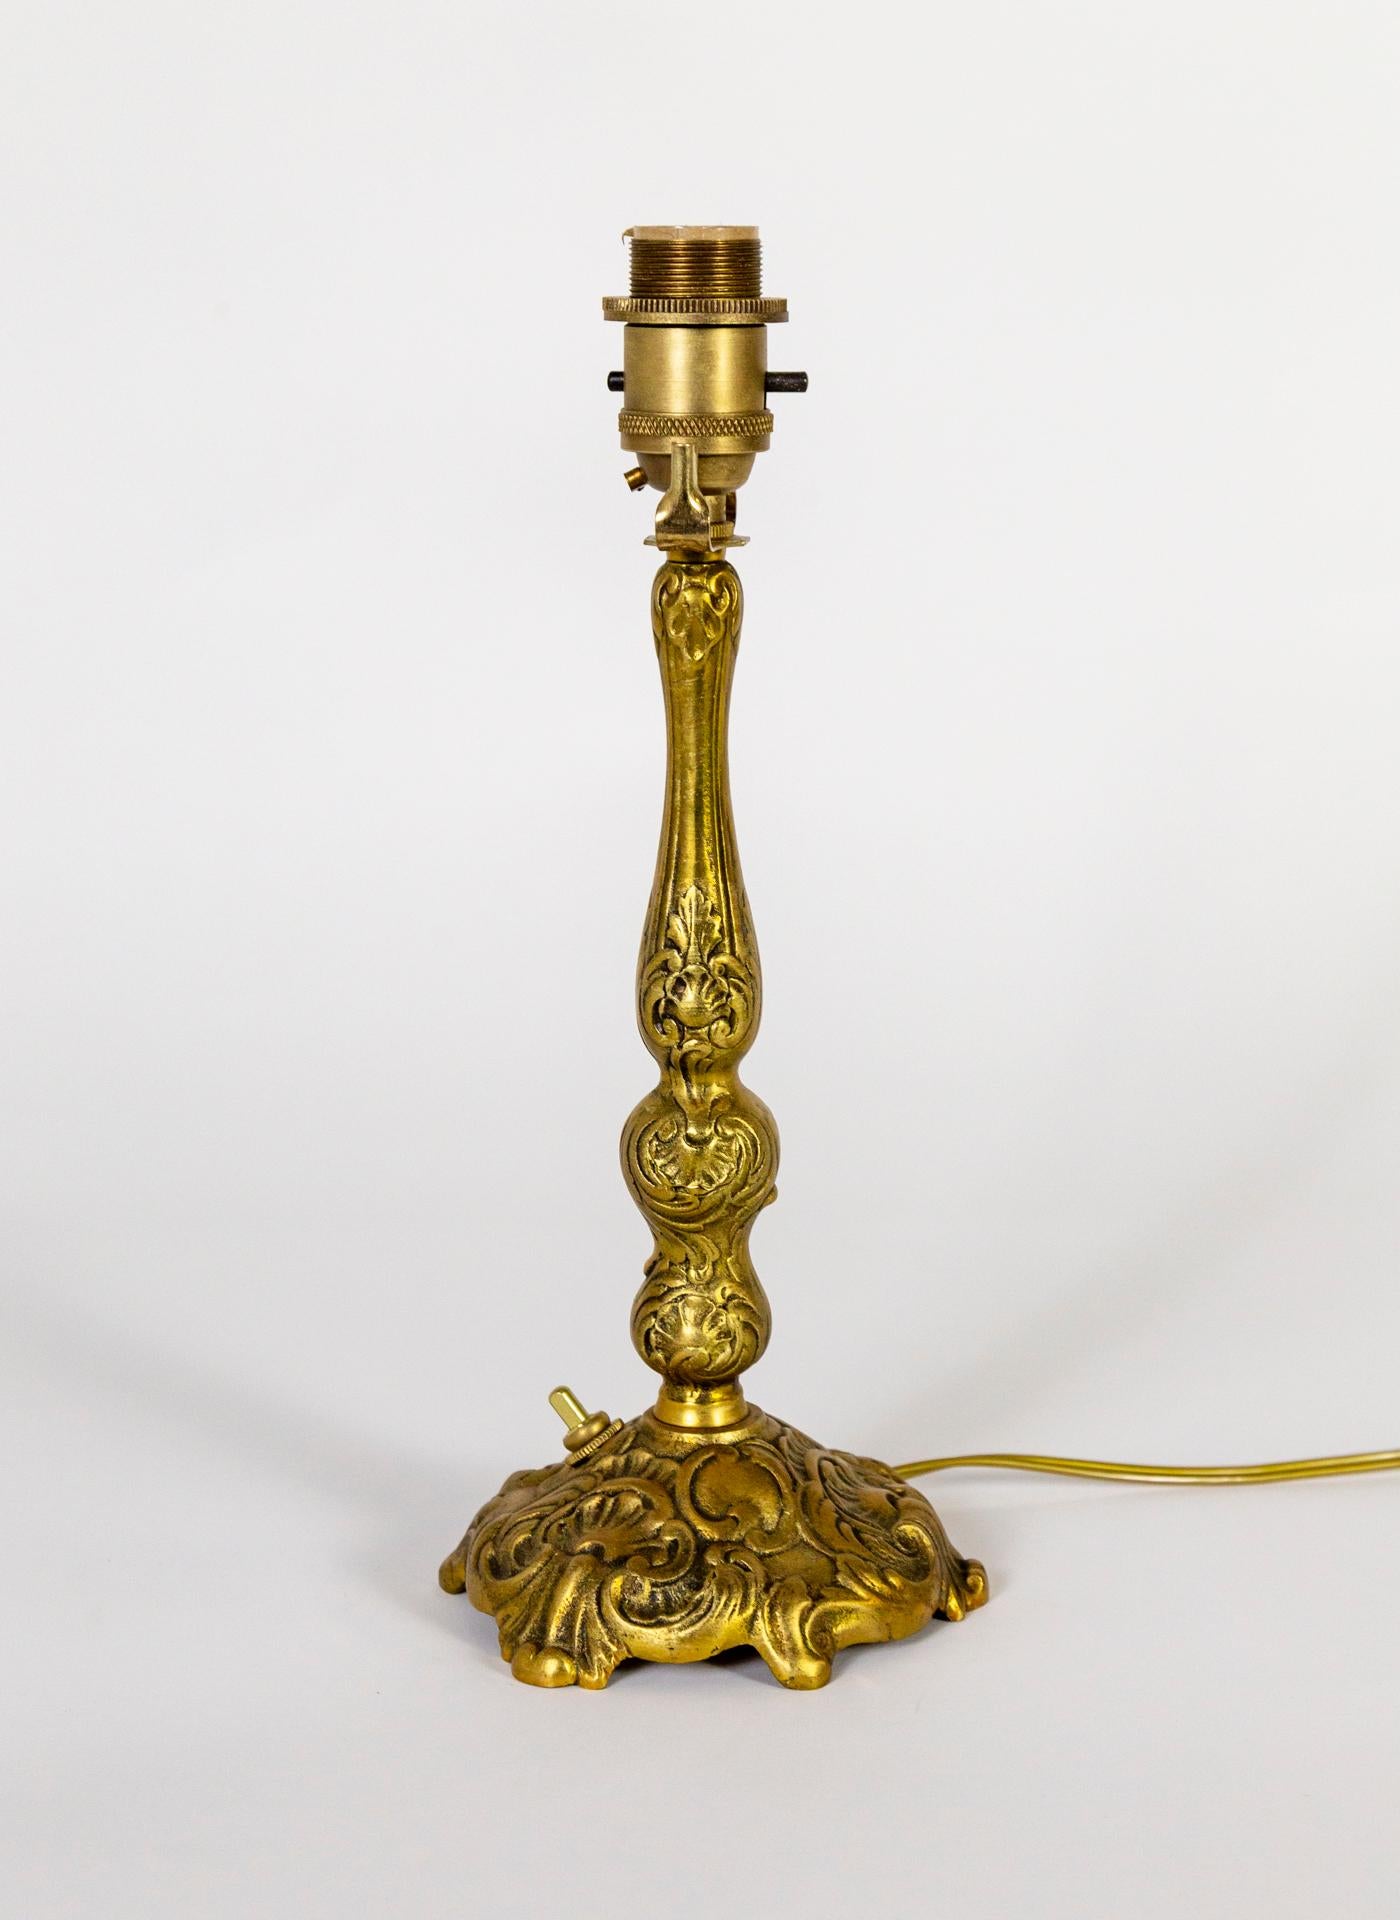 A petite, brass table lamp, finely cast with an ornate pattern of C-curves and acanthus leaves. It has a switch on both the base and socket and is newly wired. It has a saddle and a screw top socket to accommodate various shades. 5.75